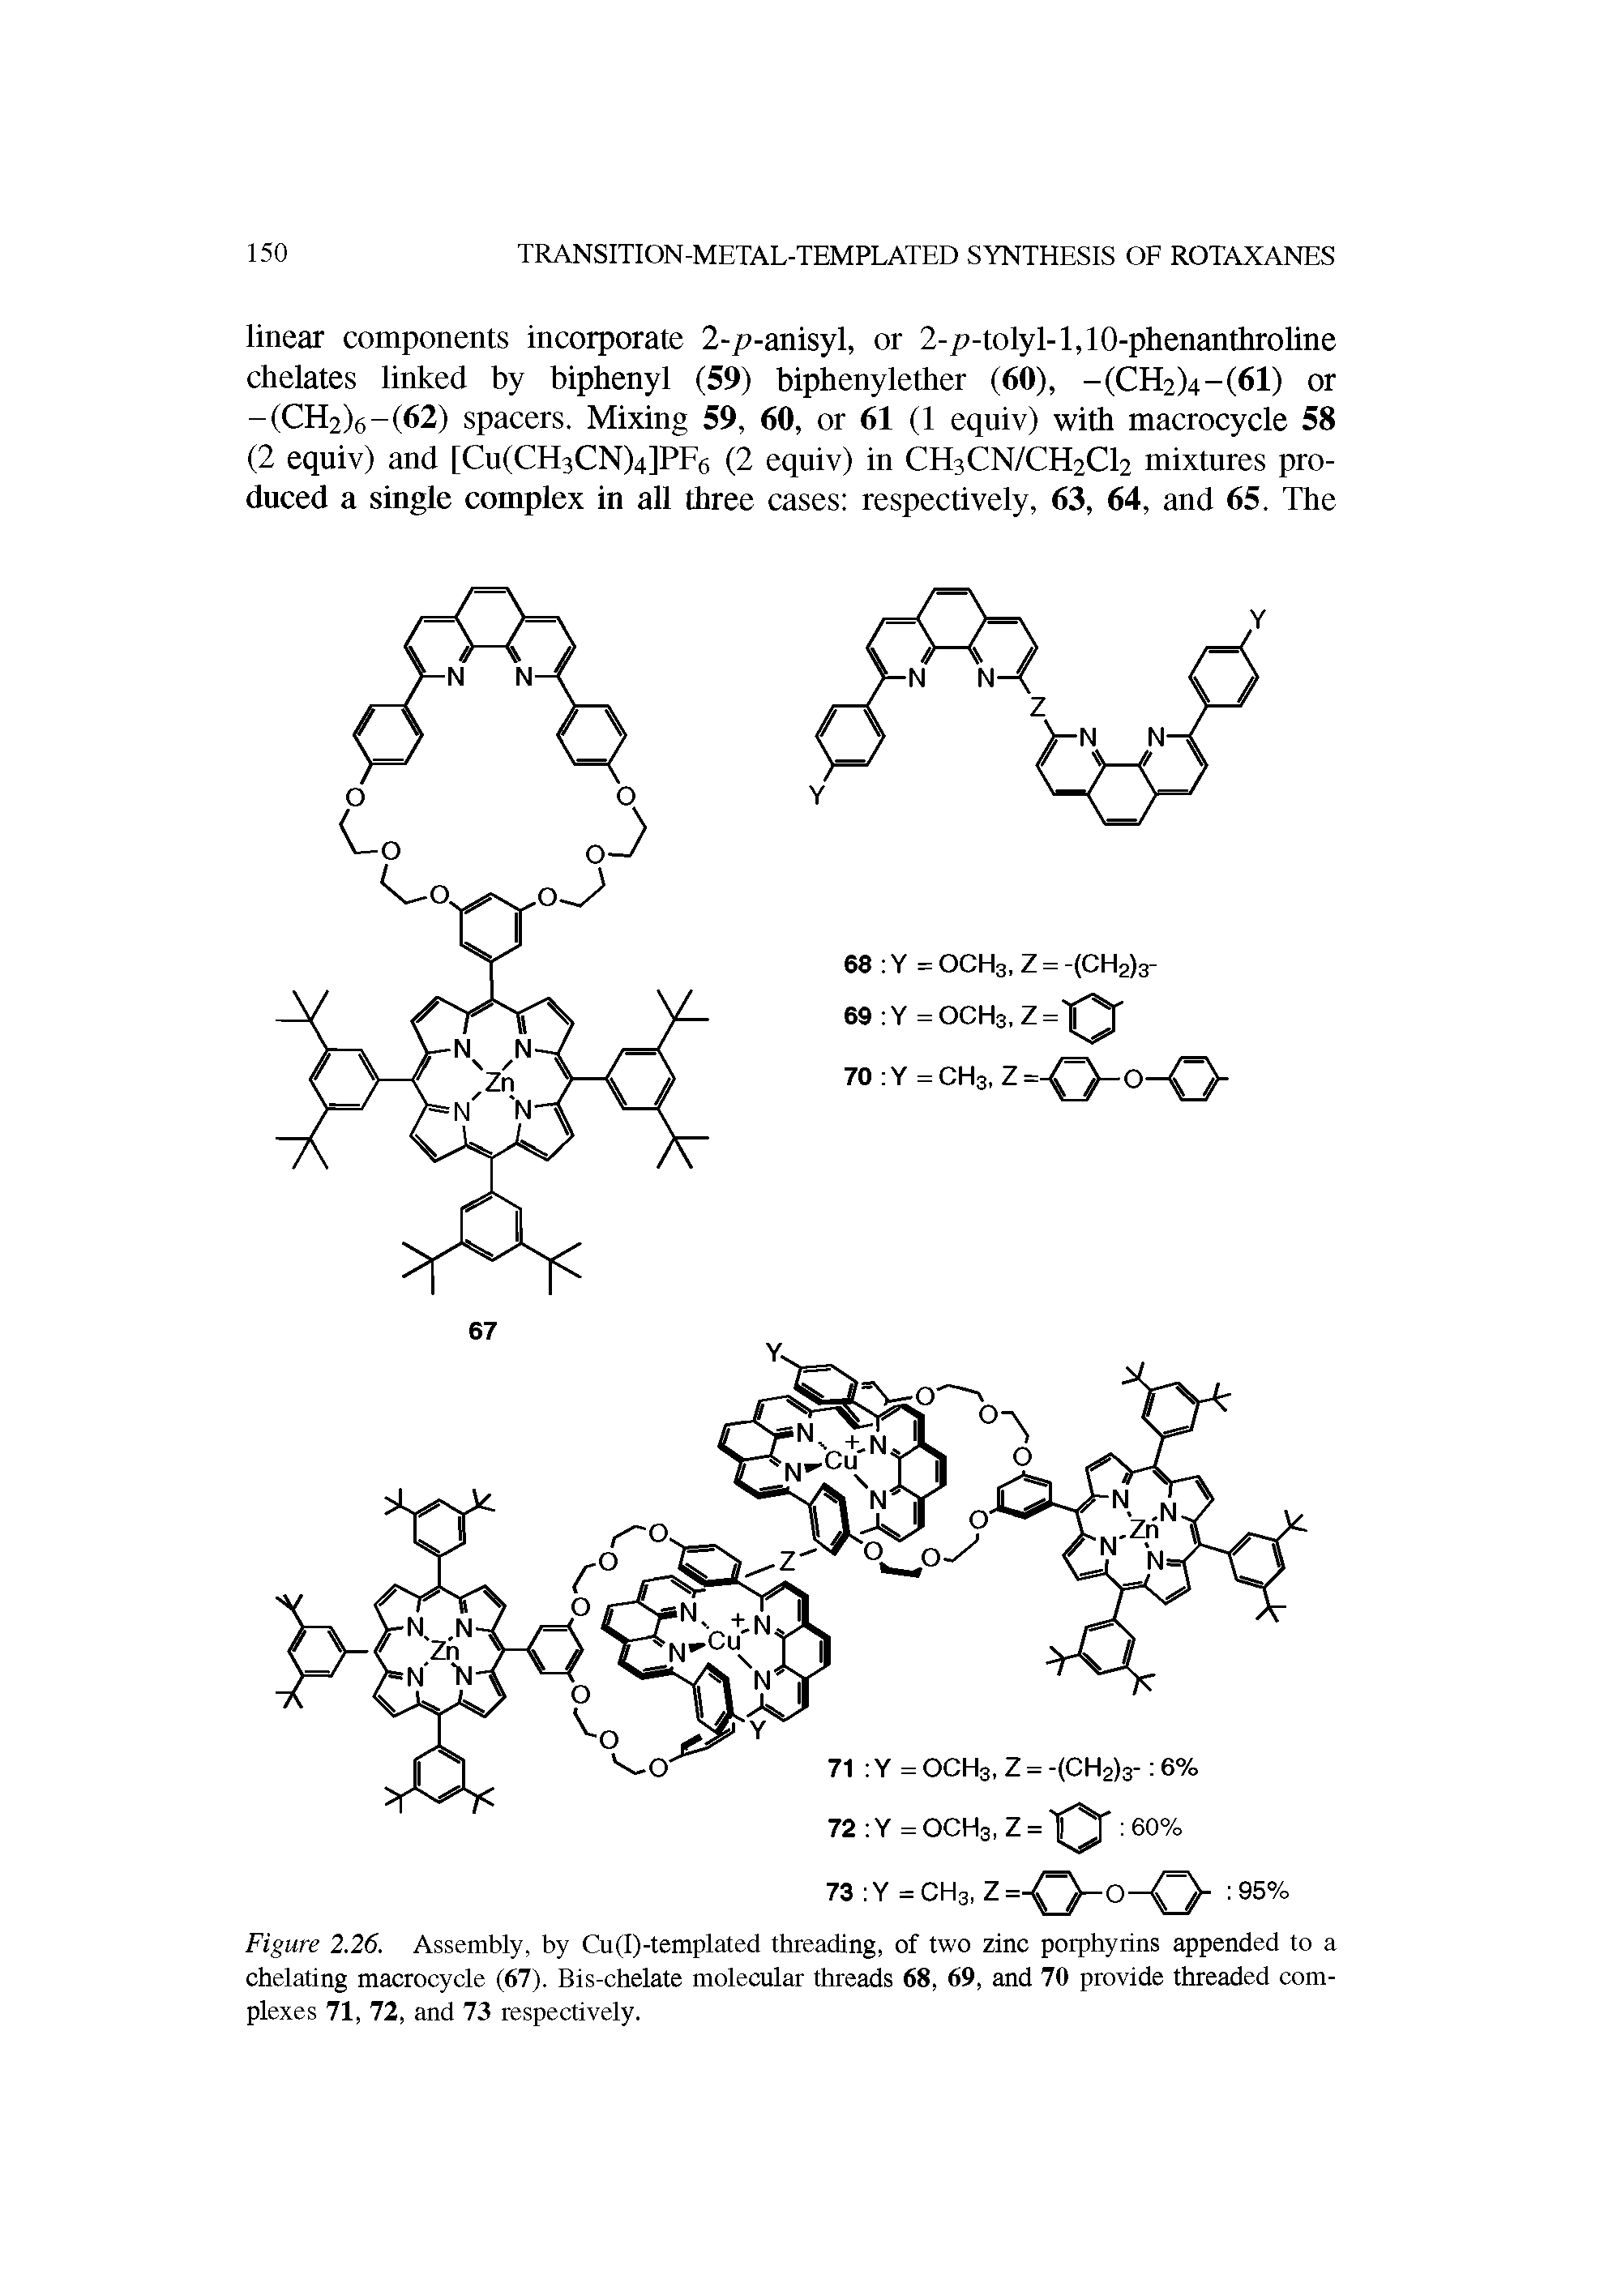 Figure 2.26. Assembly, by Cu(I)-templated threading, of two zinc porphyrins appended to a chelating macrocycle (67). Bis-chelate molecular threads 68, 69, and 70 provide threaded complexes 71, 72, and 73 respectively.